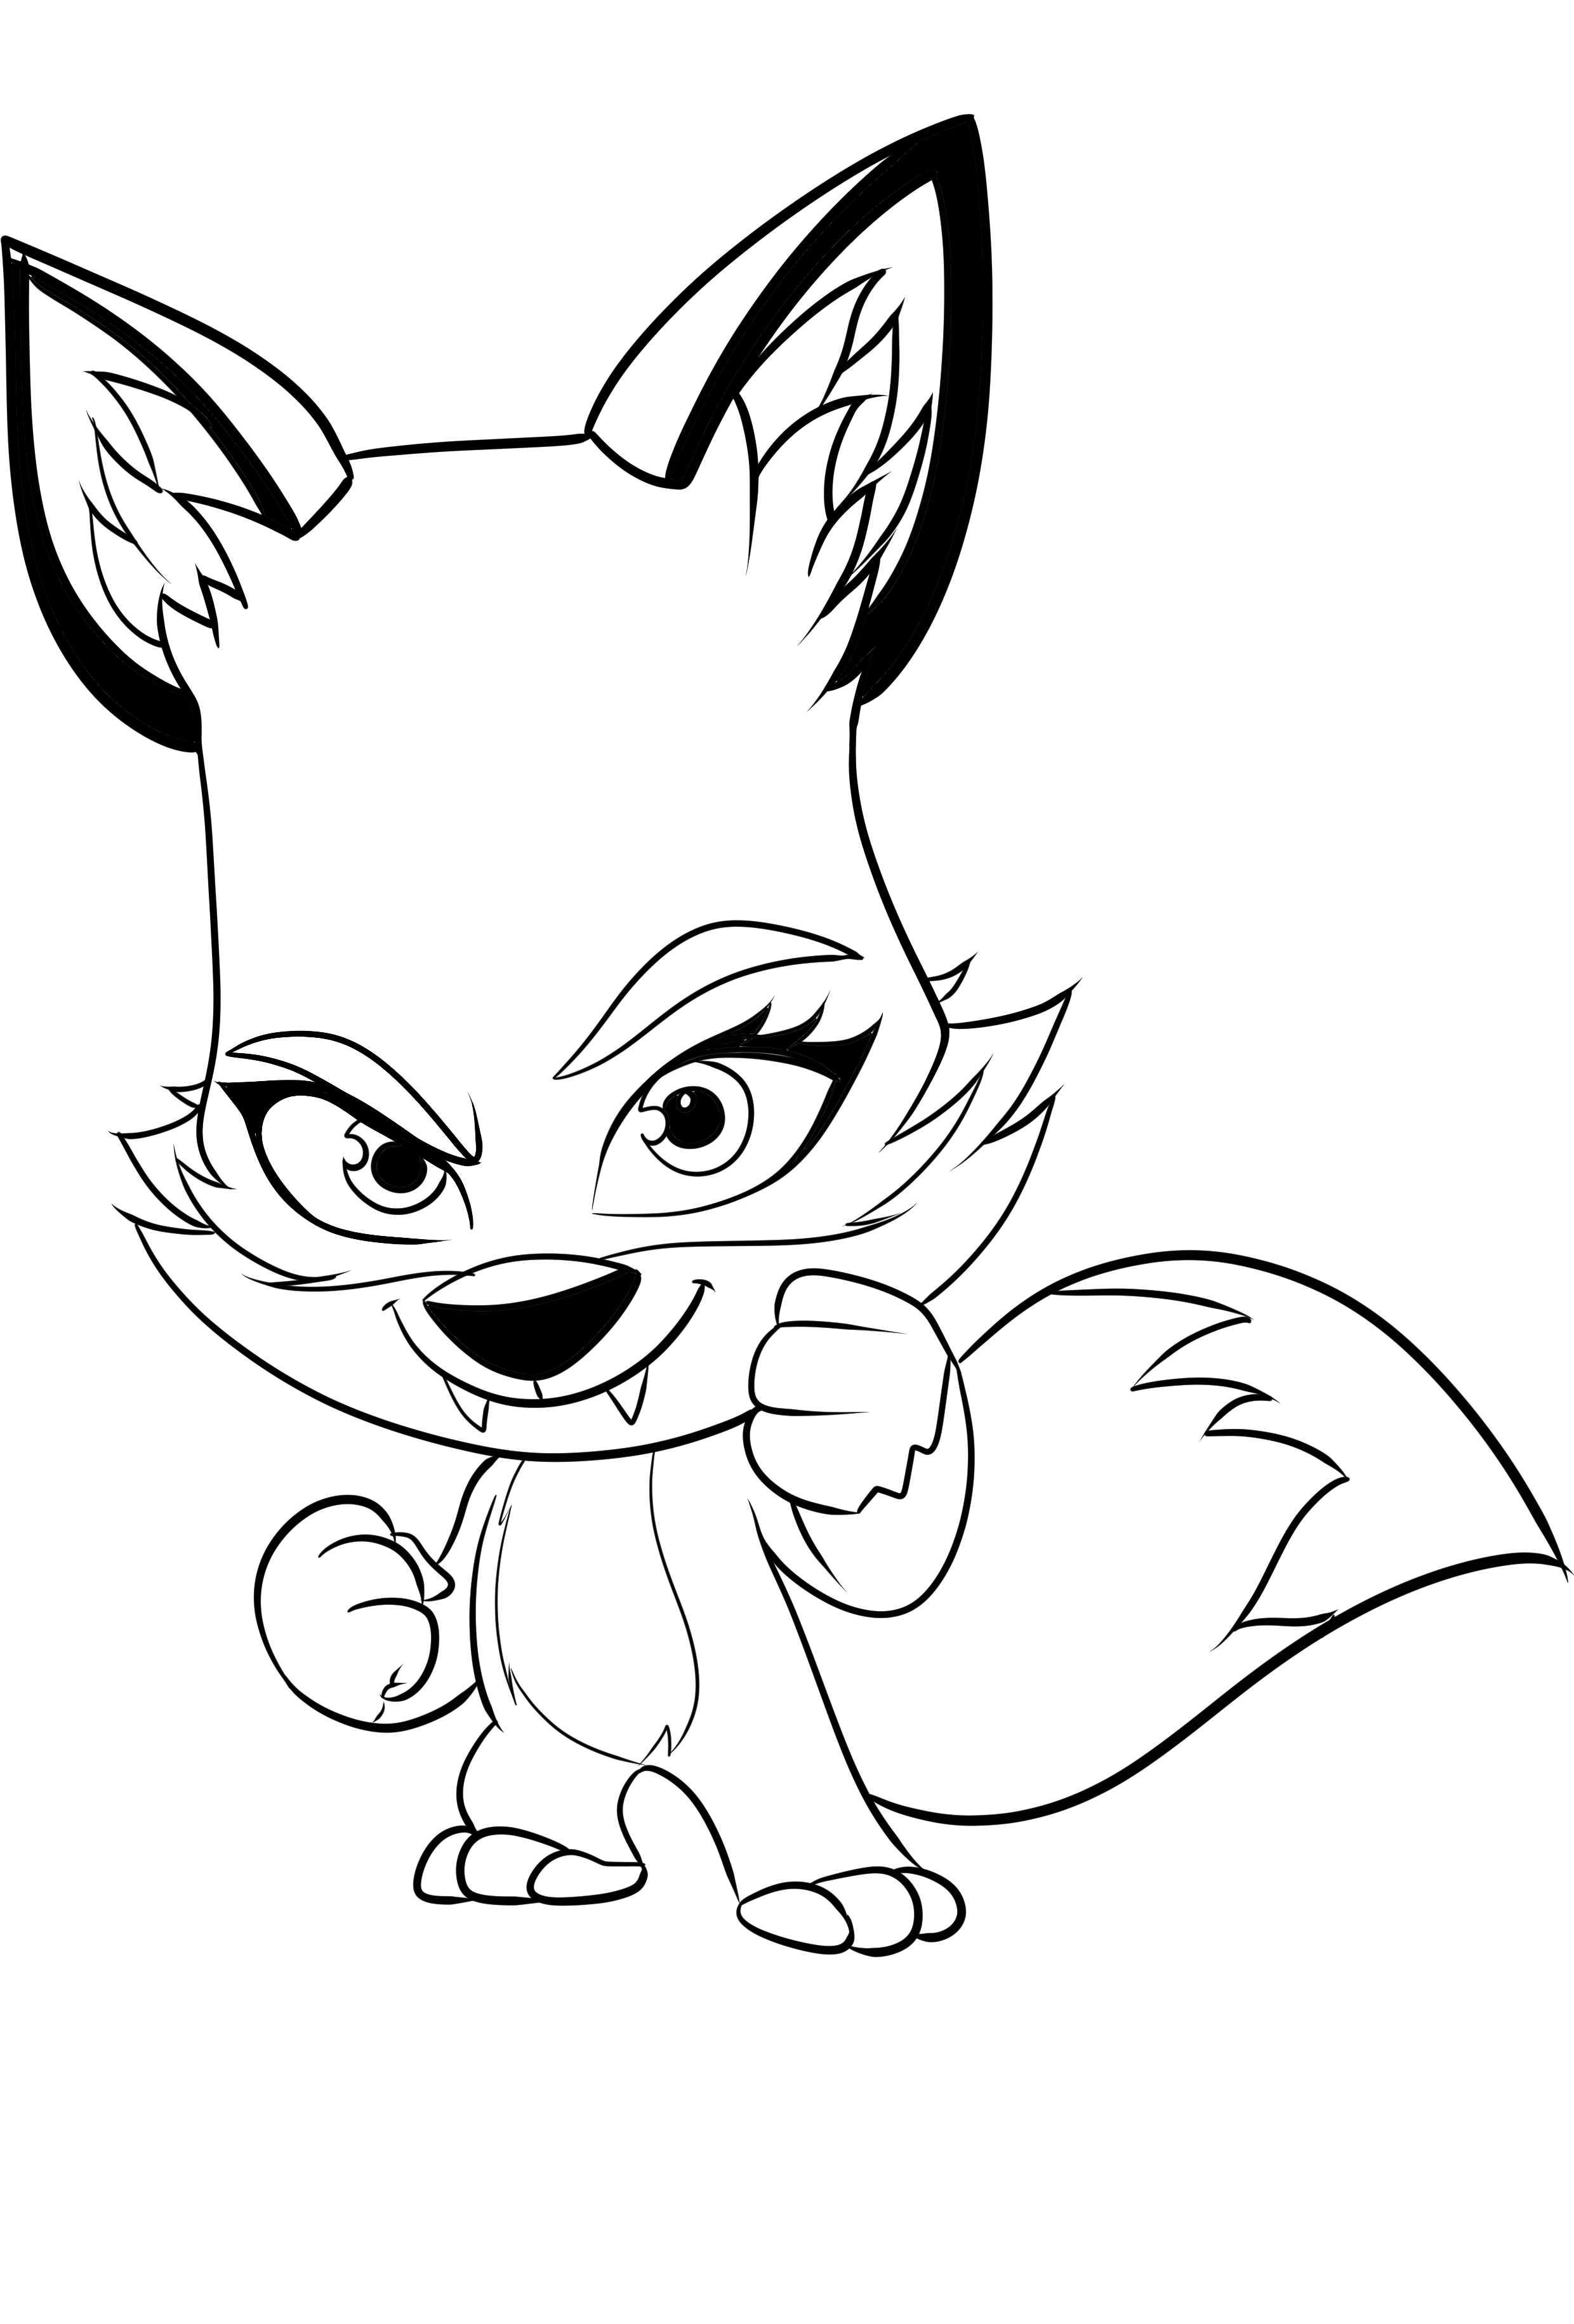 Zooba coloring page to print and color